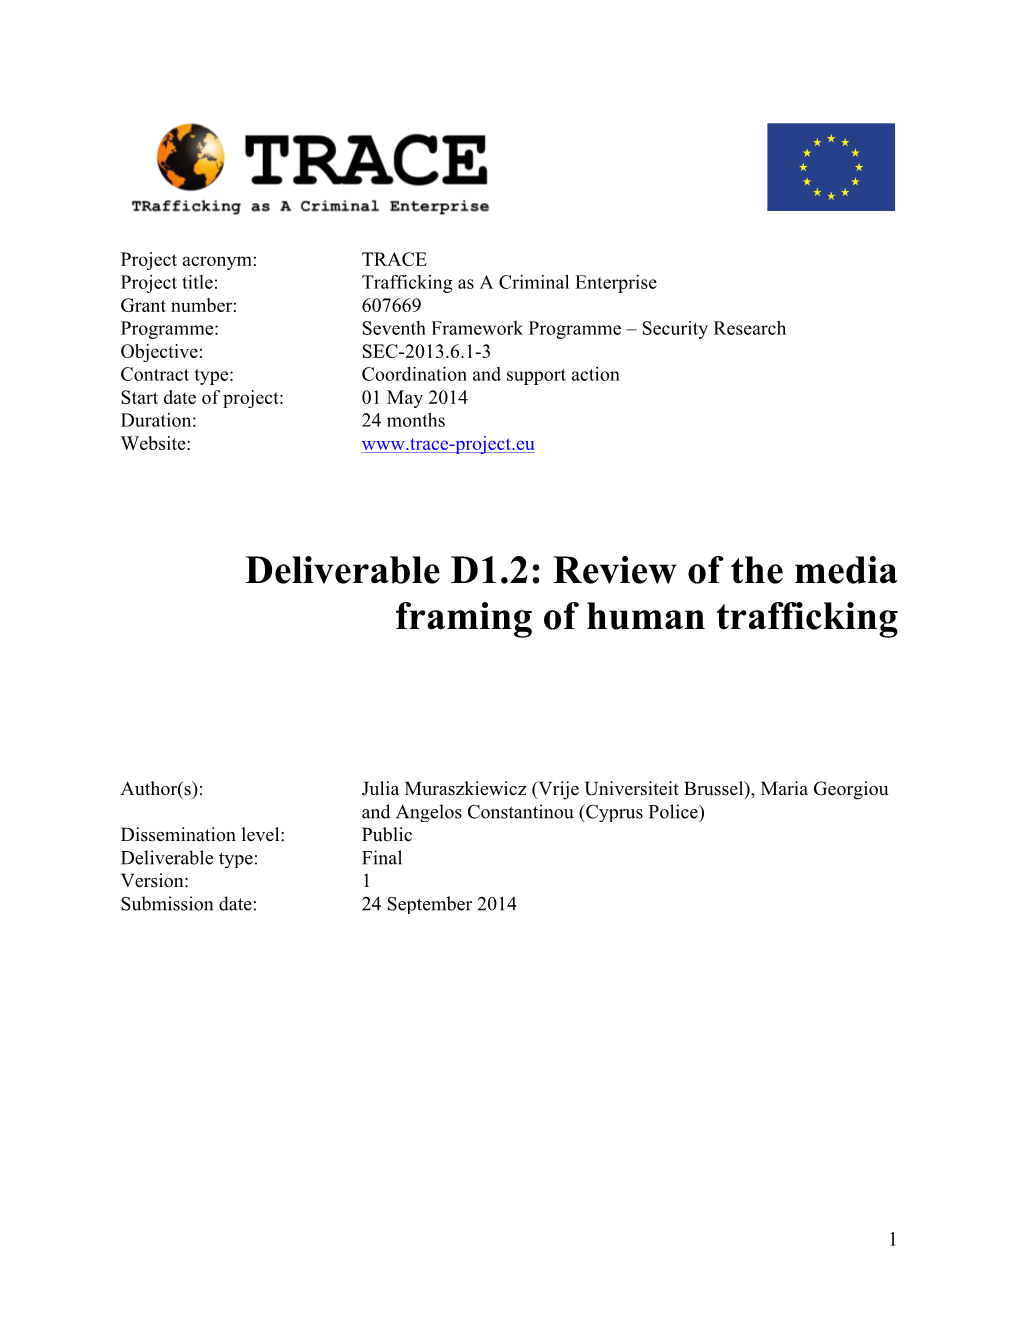 Review of the Media Framing of Human Trafficking